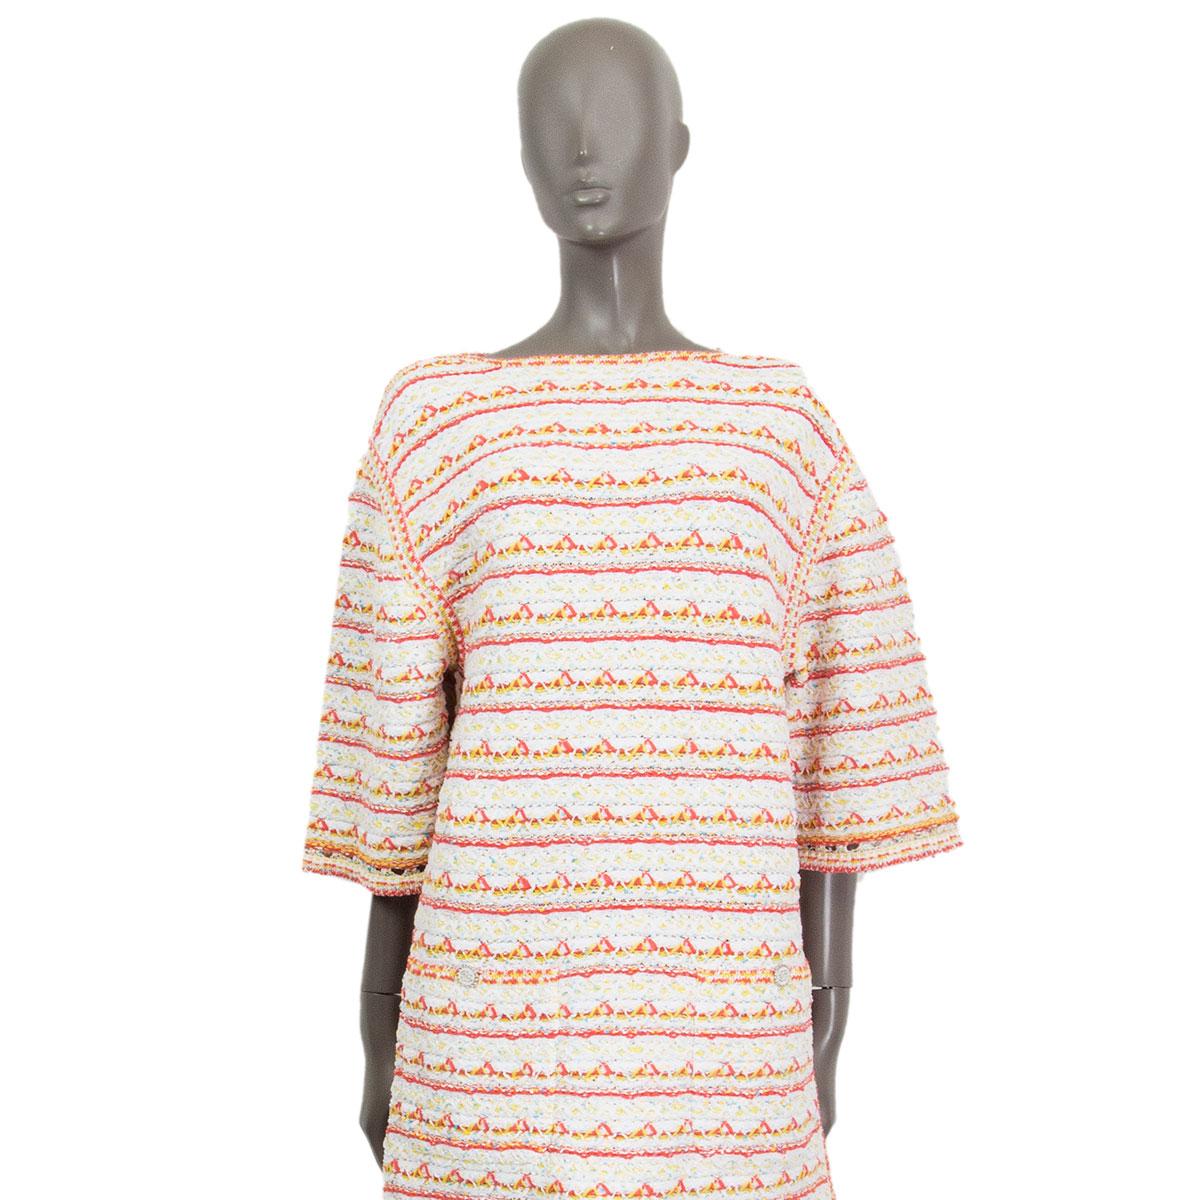 100% authentic Chanel 2019 short sleeve shift  dress in white, coral, yellow and blue polyamide (41%)  cotton (40%) silk (7%) viscose (7%) paper (5%). With a high adjustable side-zipper on the left side, drop-shoulders, crochet hem, two faux-pockets